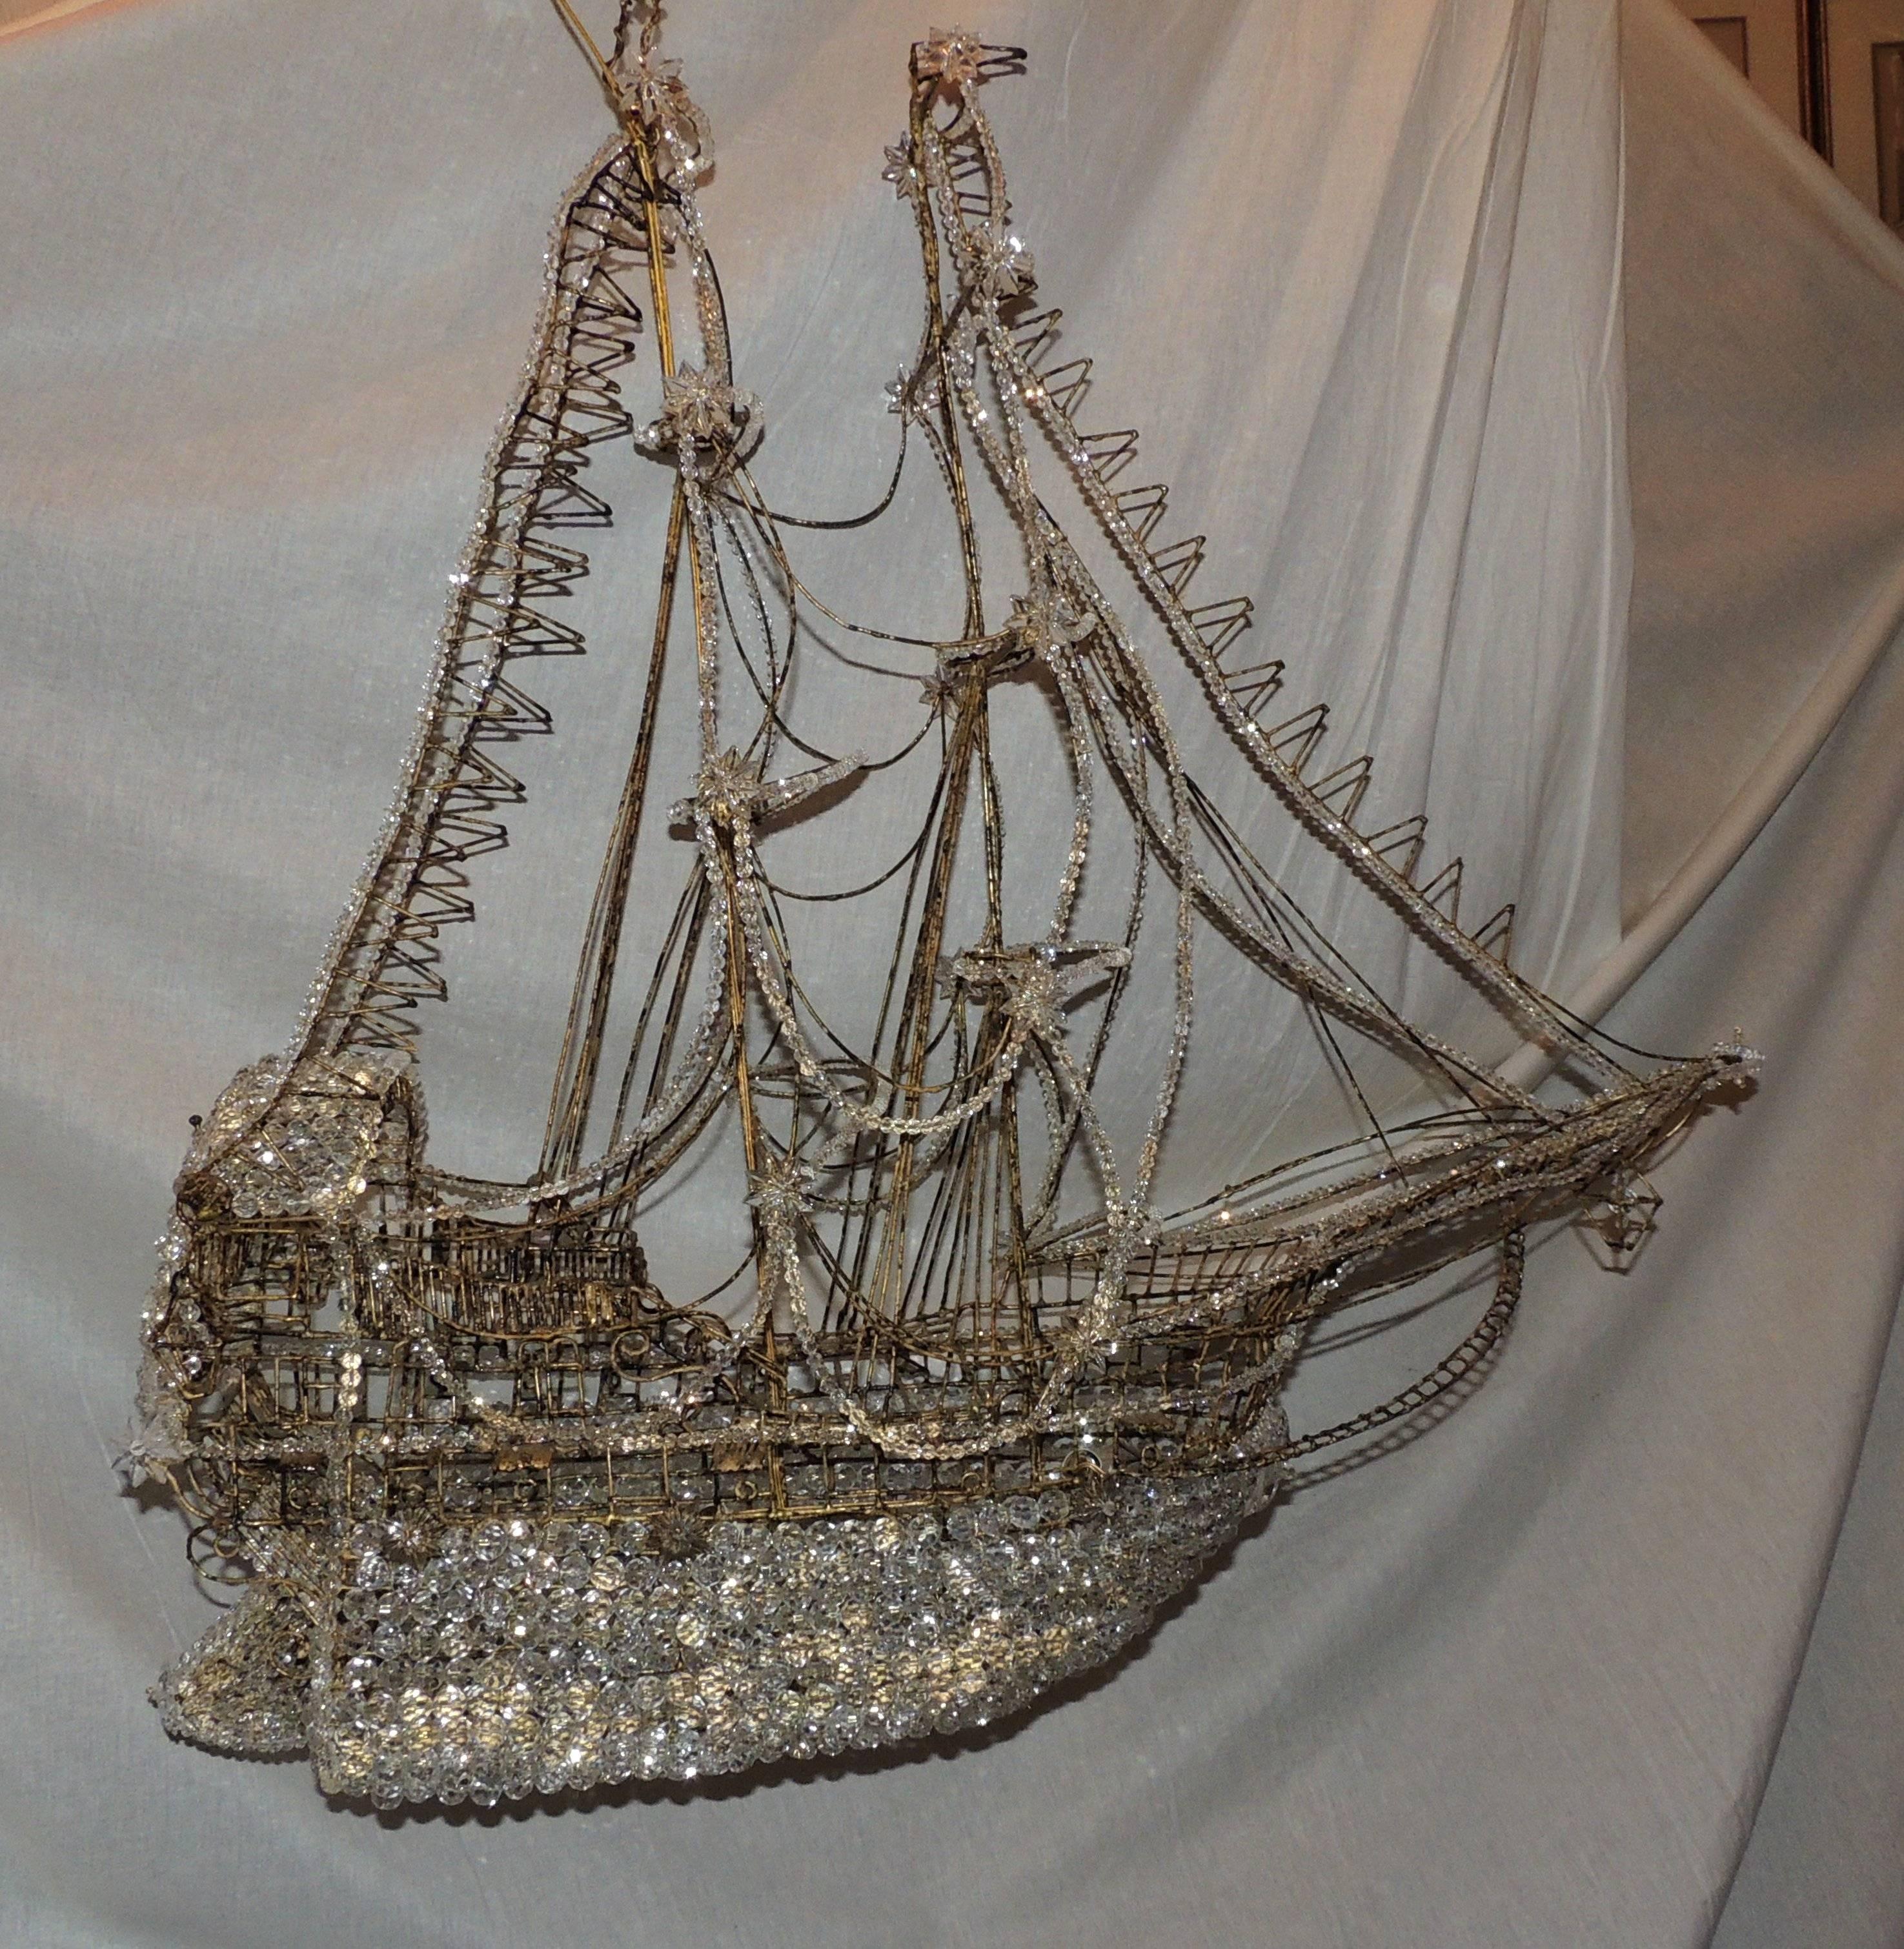 This gilt schooner boat chandelier is beautifully detailed with a crystal beaded keel, crystal star accents and lantern on the bow. Crystal beads highlight the various lines to the top of the ship.
A beautiful addition to any space
This fabulous